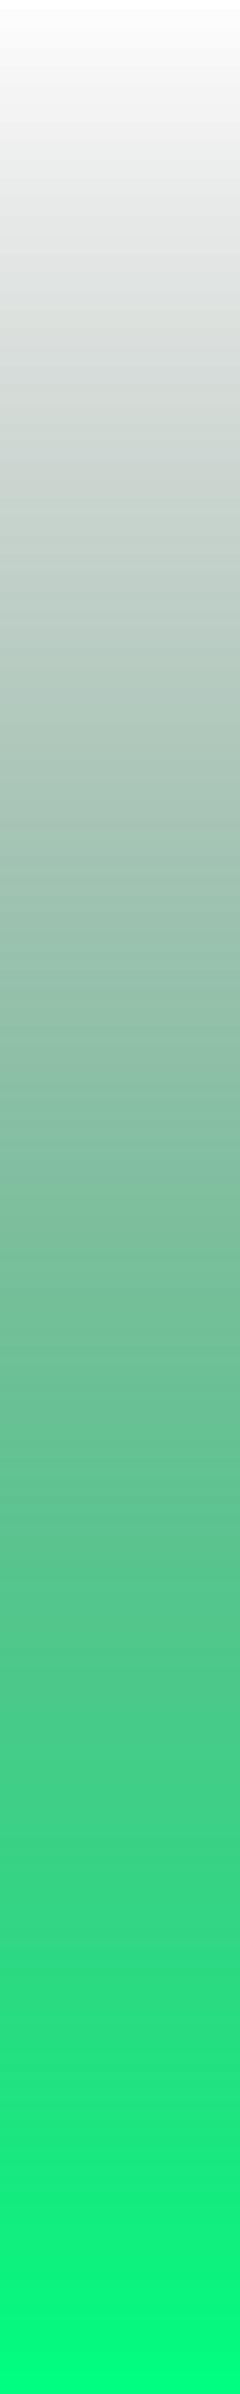 Spring Green Gradient PNG icons